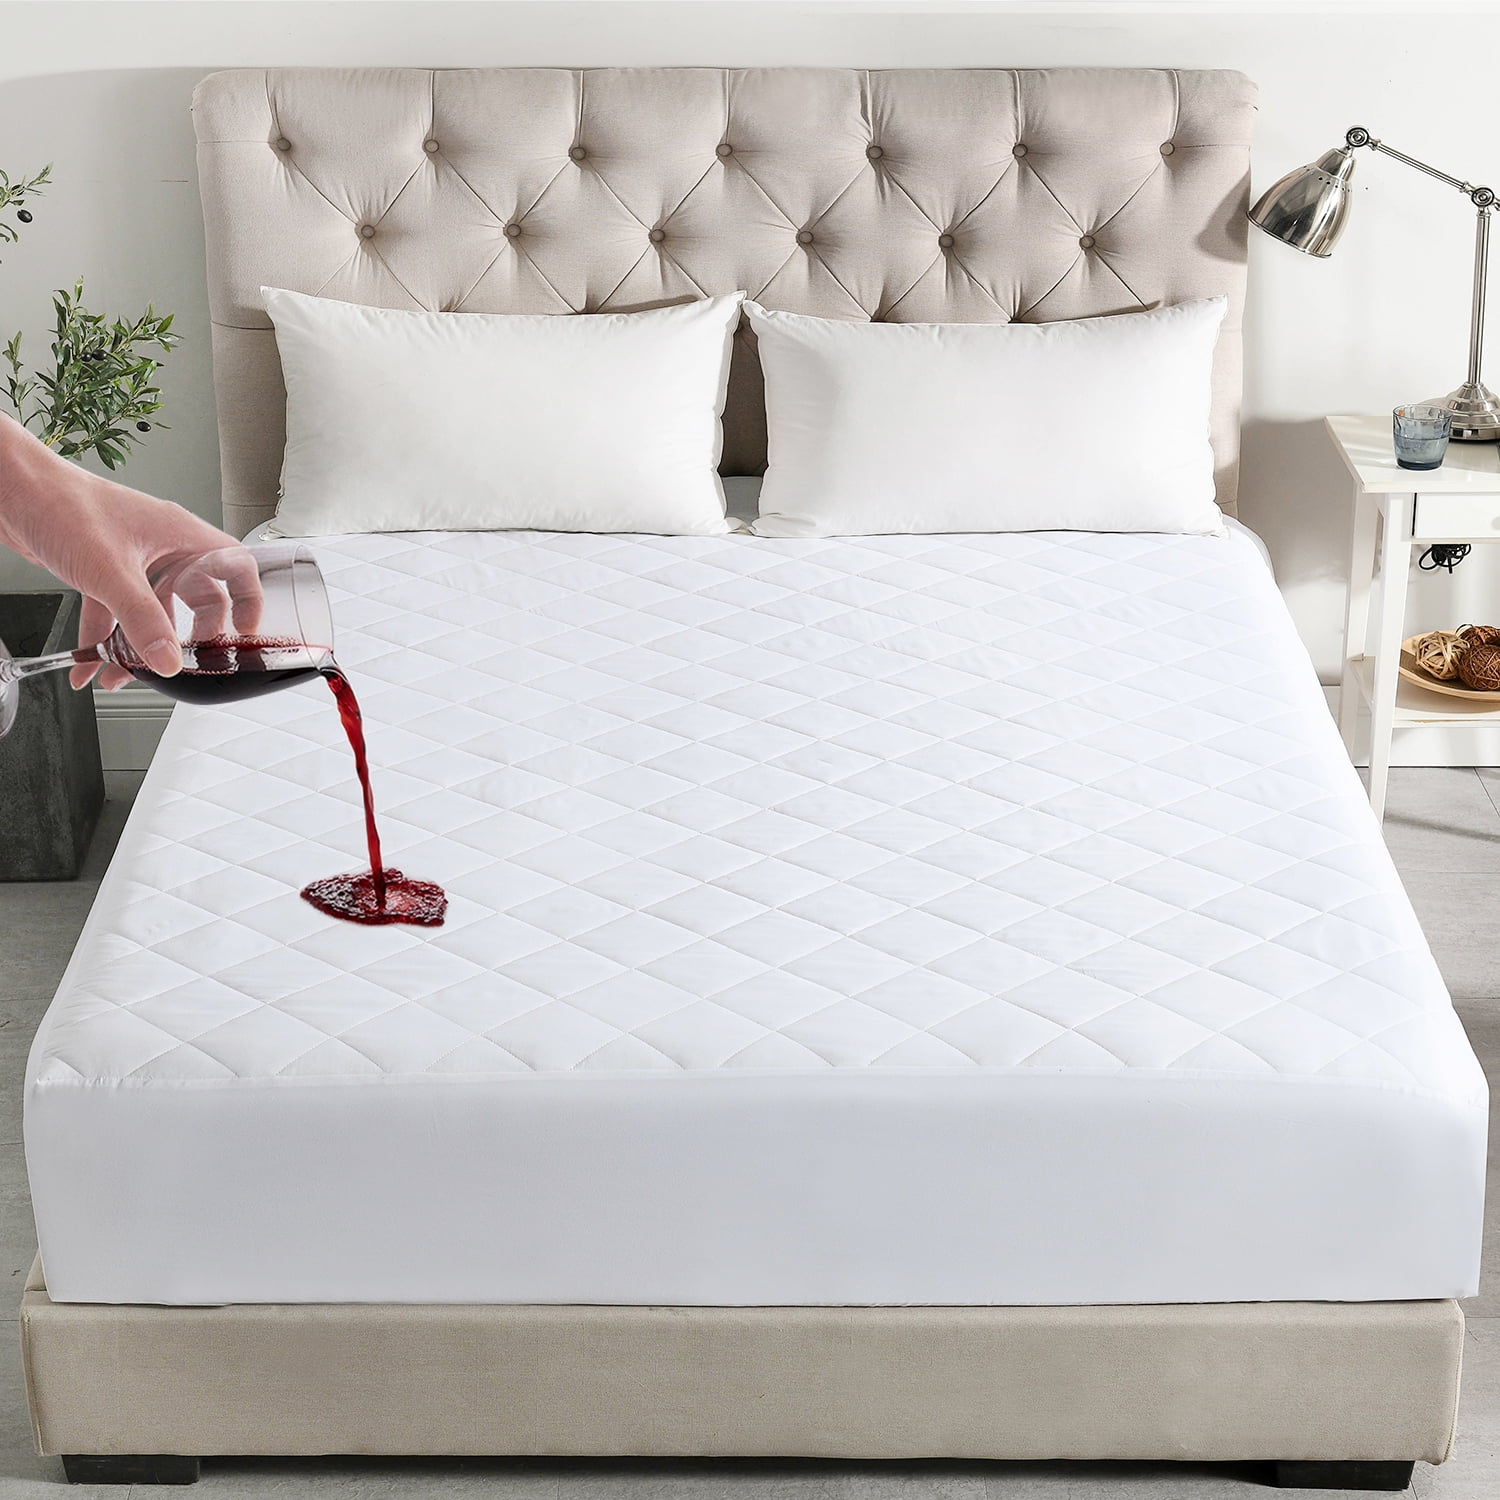 EXTRA DEEP QUILTED MATTRESS PROTECTOR 12" FITTED BED COVER ALL SIZES 